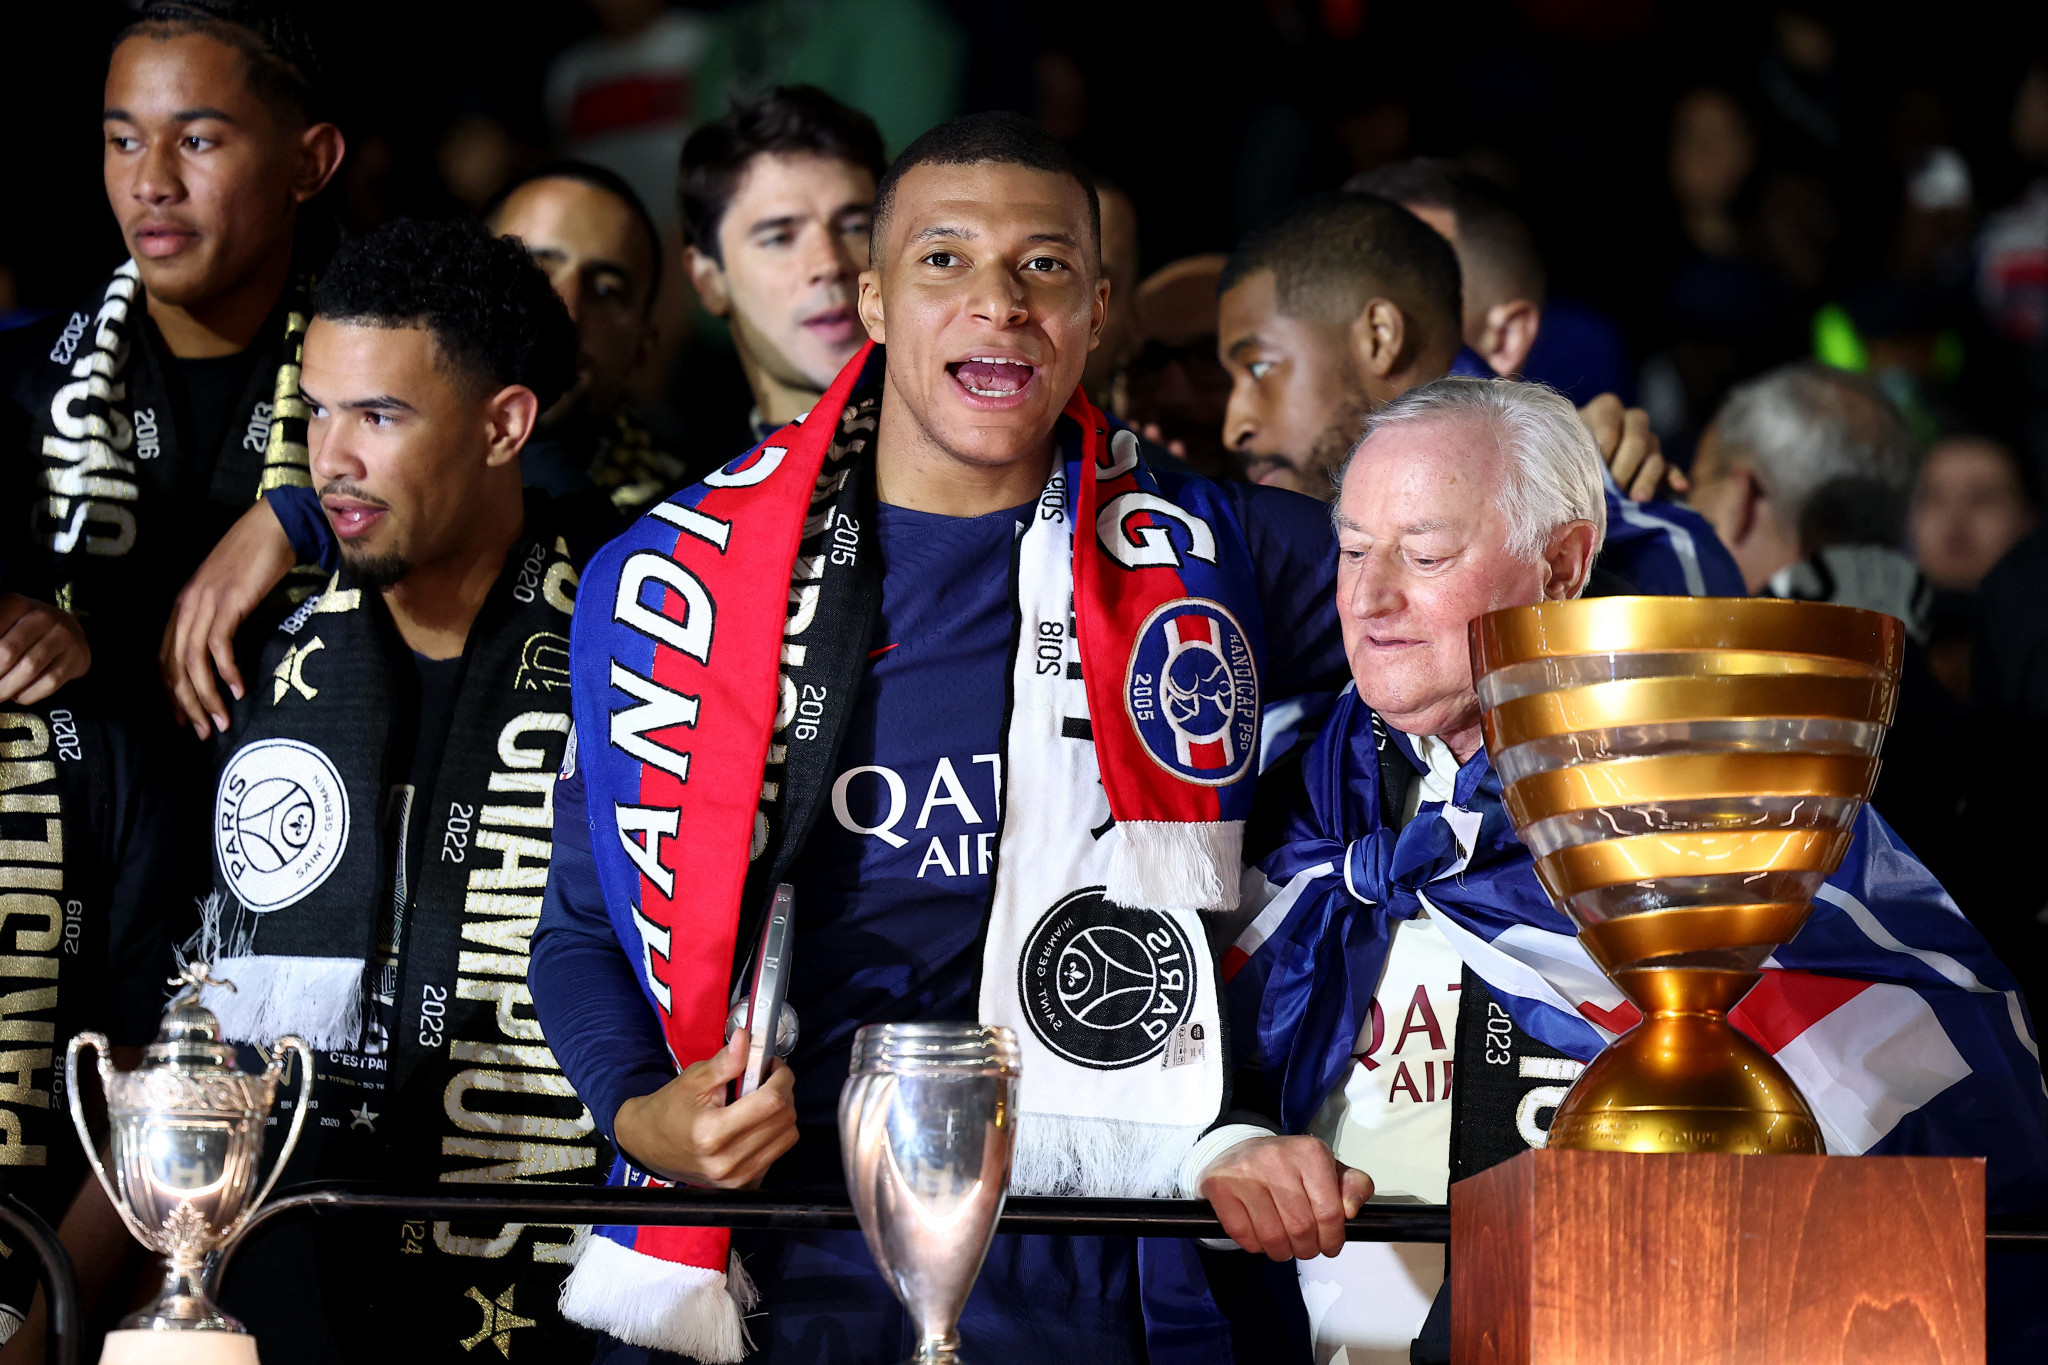 Mbappe, who won the Ligue 1 title with PSG, also secured the accolade for France's best player this season. GETTY IMAGES